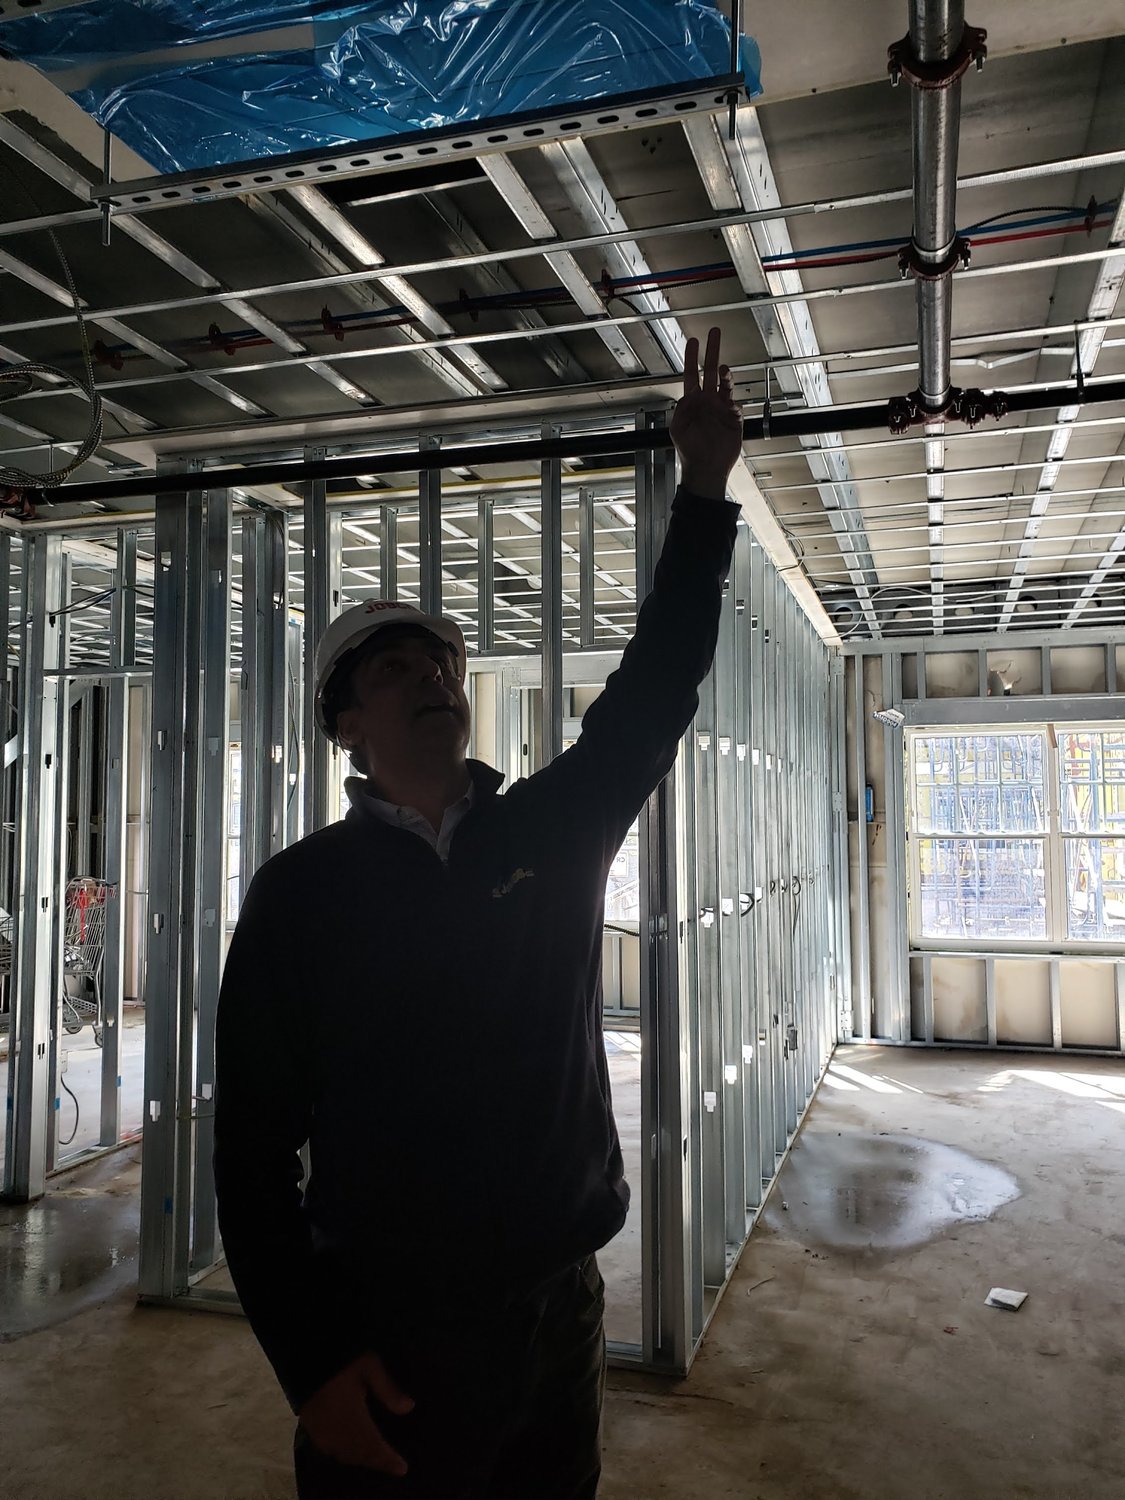 Jobco’s project manager, Spiros Triantafyllou, pointed at the central heating and air conditioning in one of the apartments under construction at the new Moxie Rigby in Freeport.